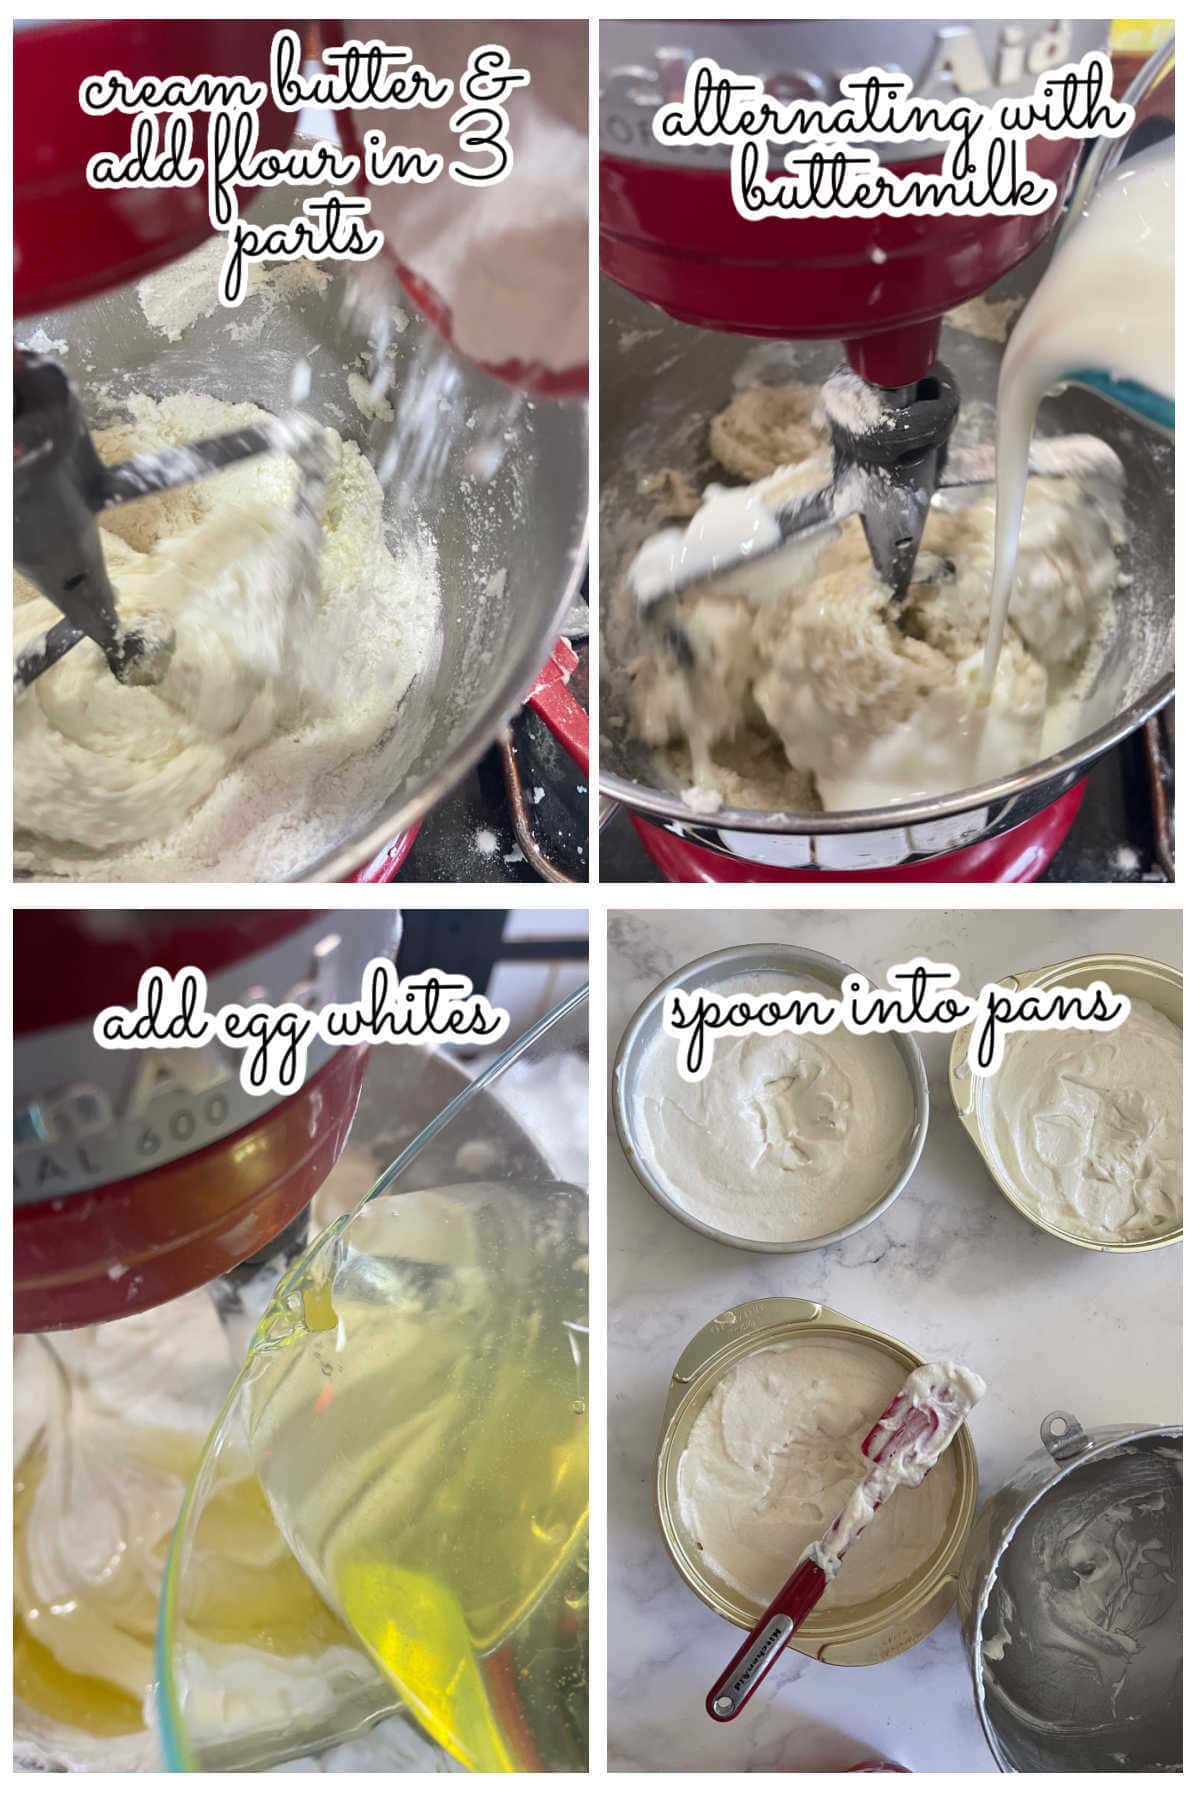 Step by step images for this recipe.